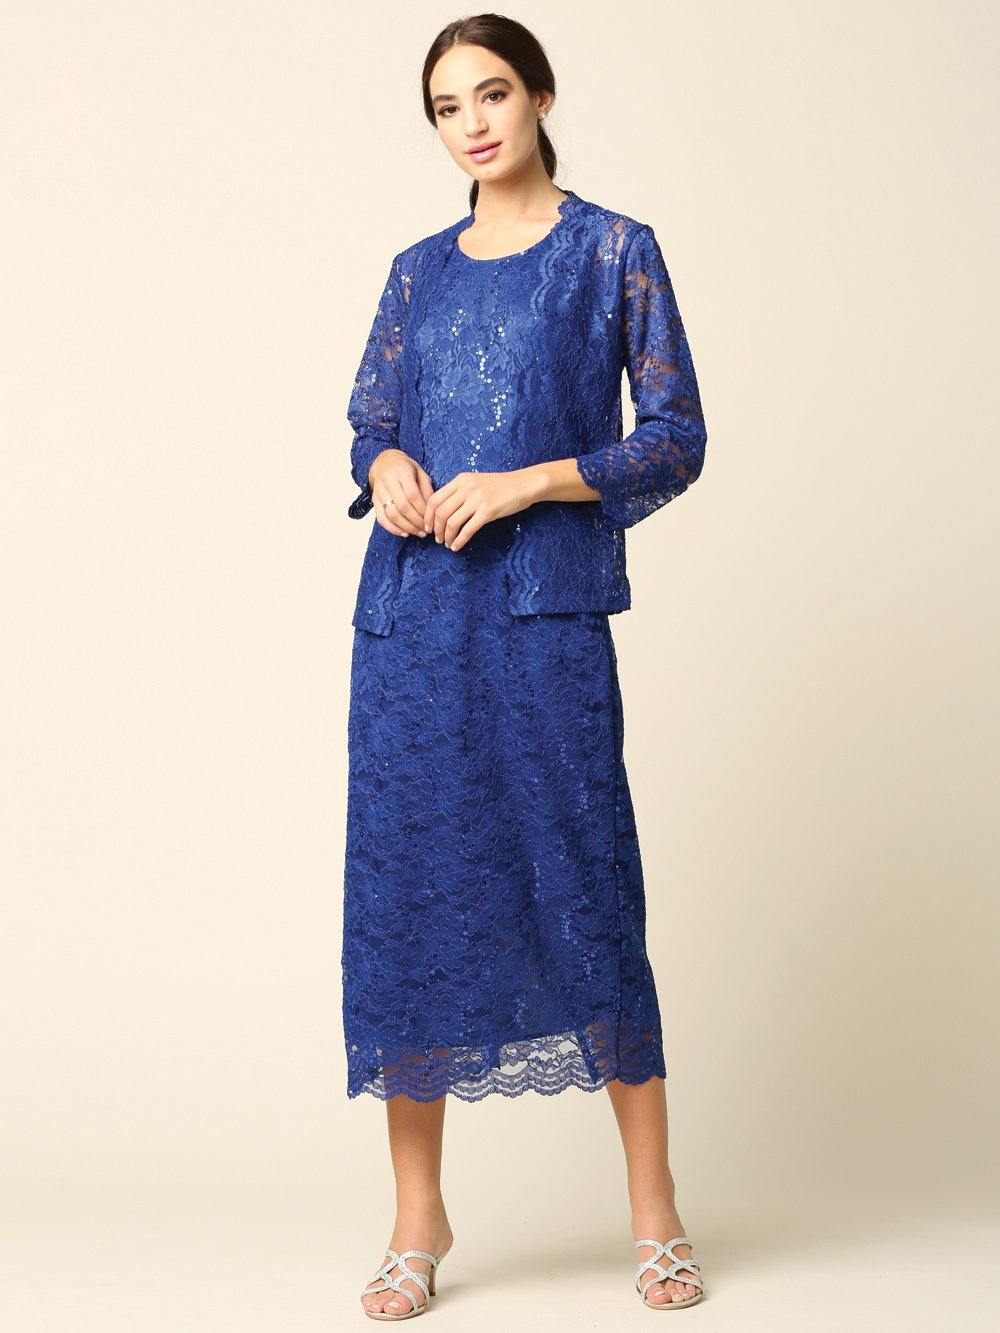 Mother of the Bride Formal Lace Jacket Dress - The Dress Outlet Eva Fashion